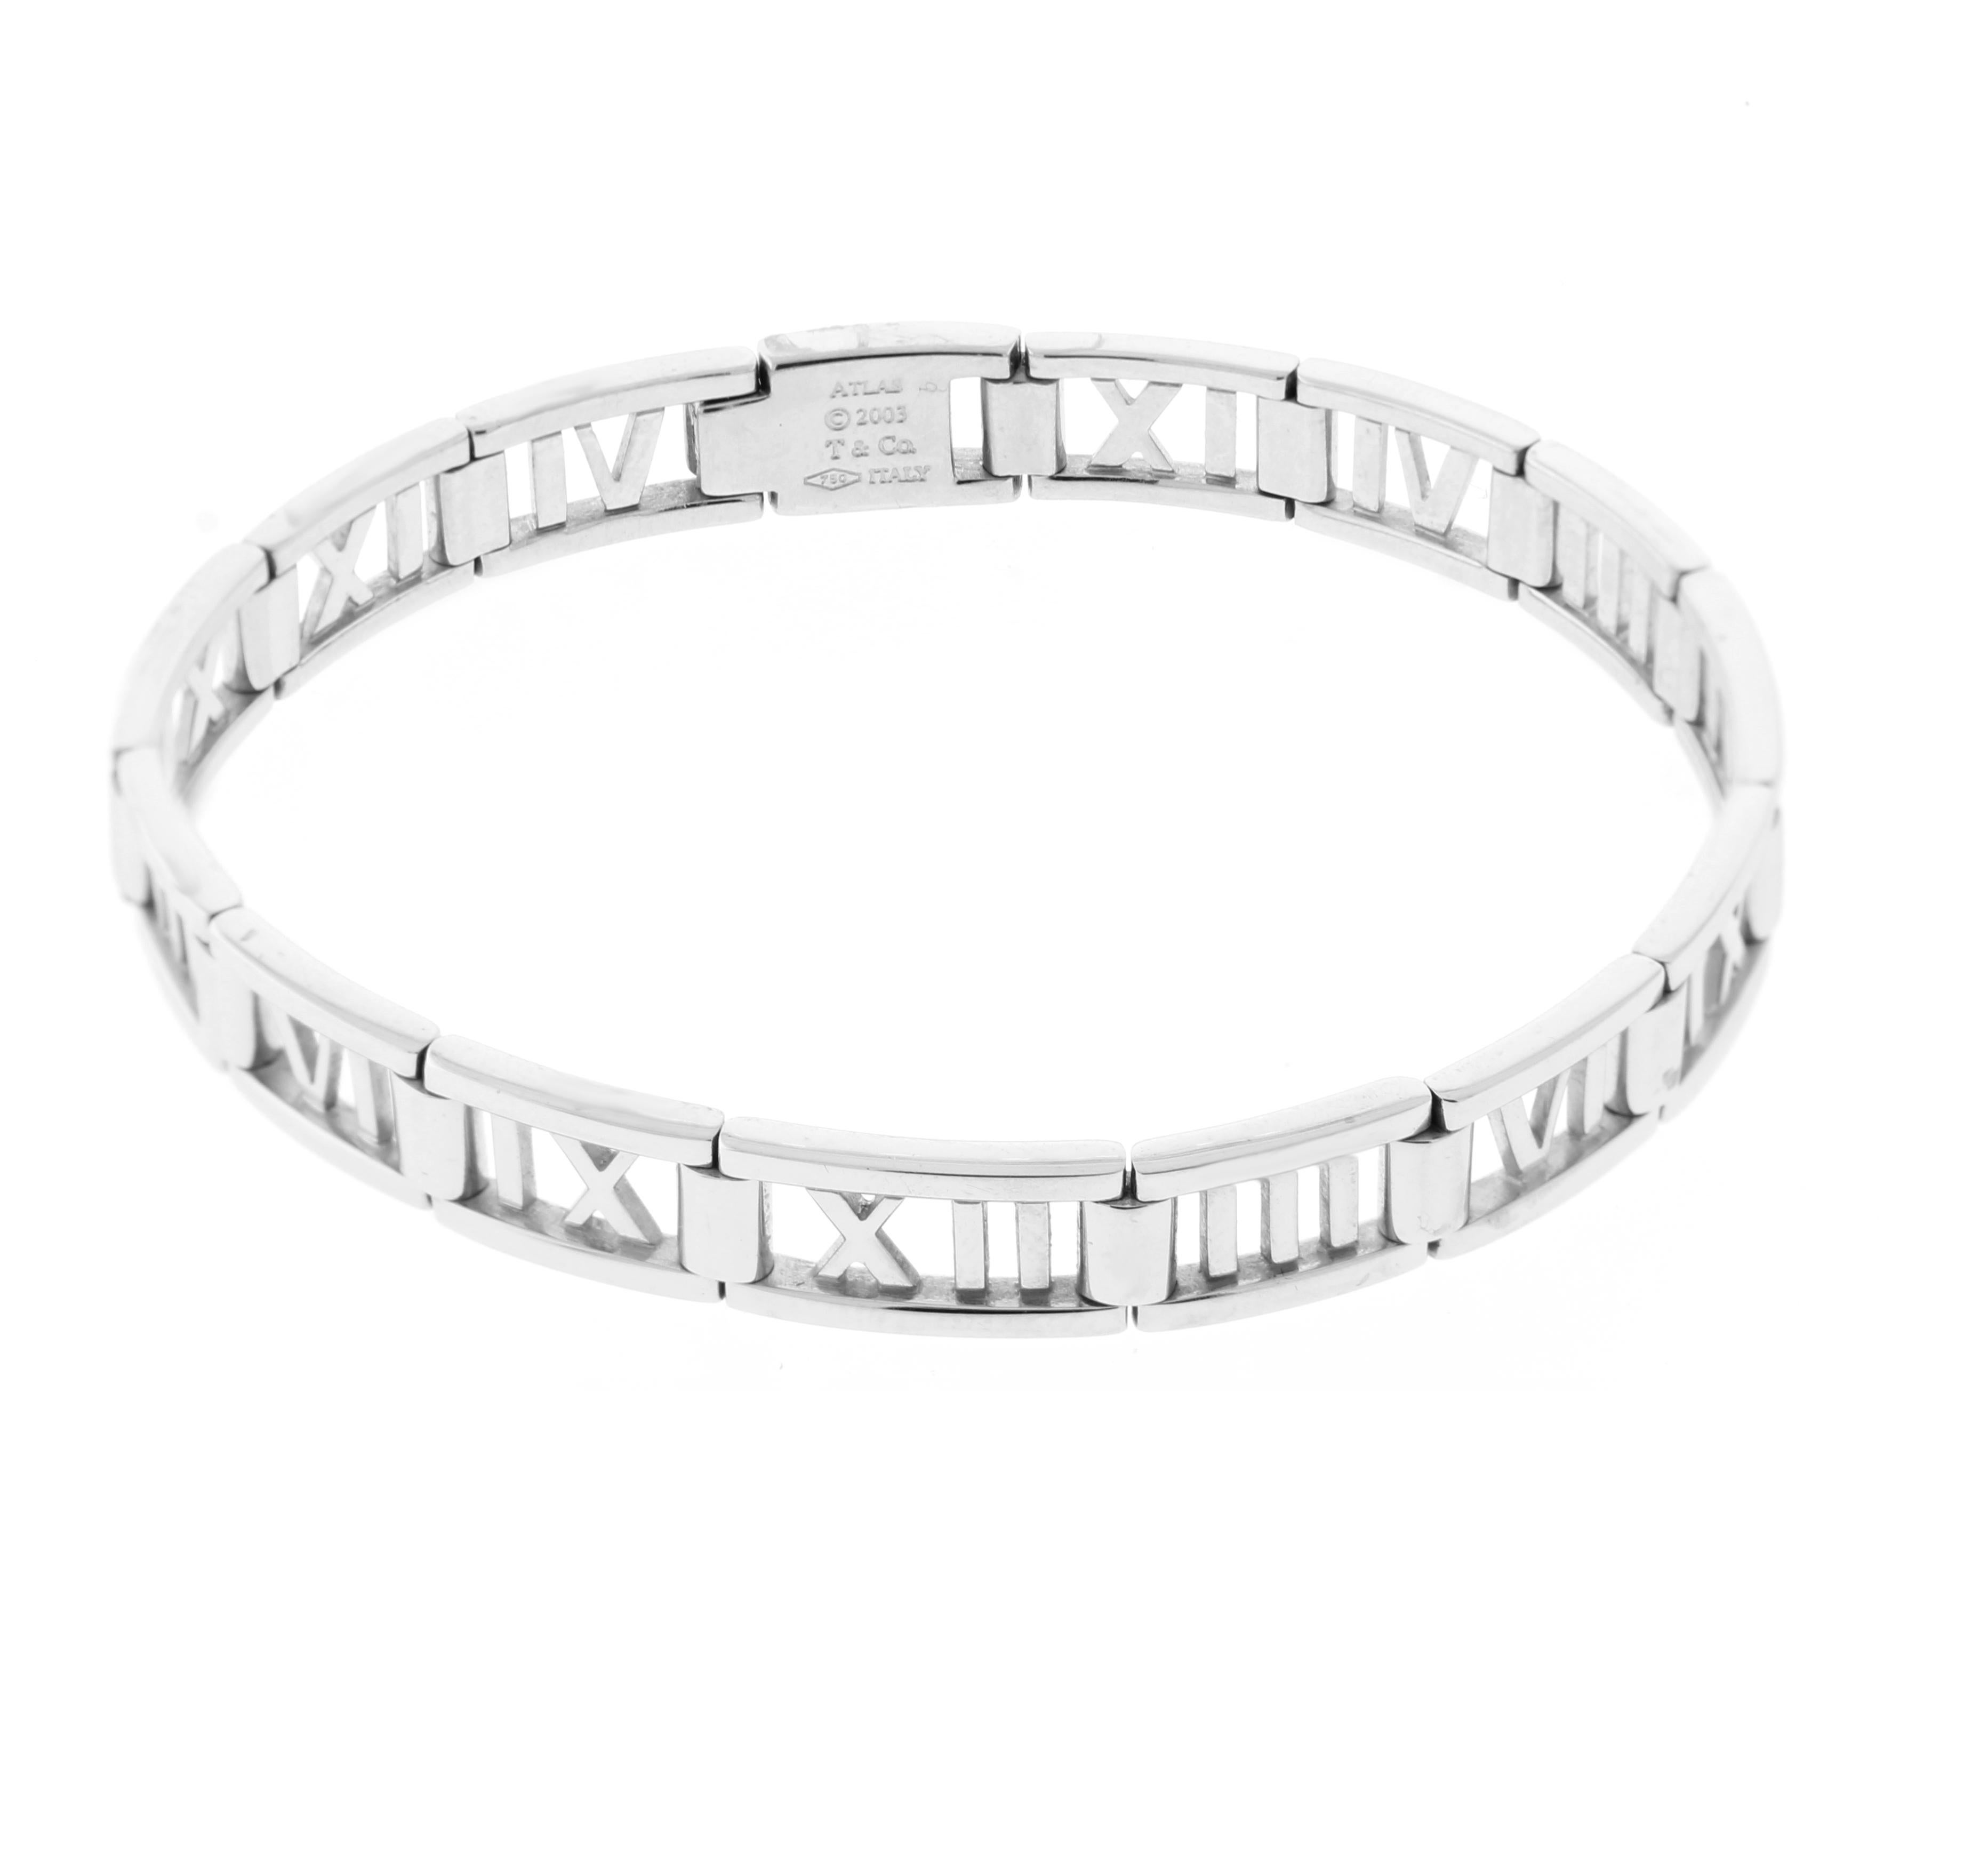 From Tiffany & Co.'s Atlas collection thier open hinged roman numeral bracelet in 18 karat white gold. The graphic motif of the Roman numeral jewelry was inspired by the Atlas clock on the facade of Tiffany’s Fifth Avenue store
♦ Designer: Tiffany &